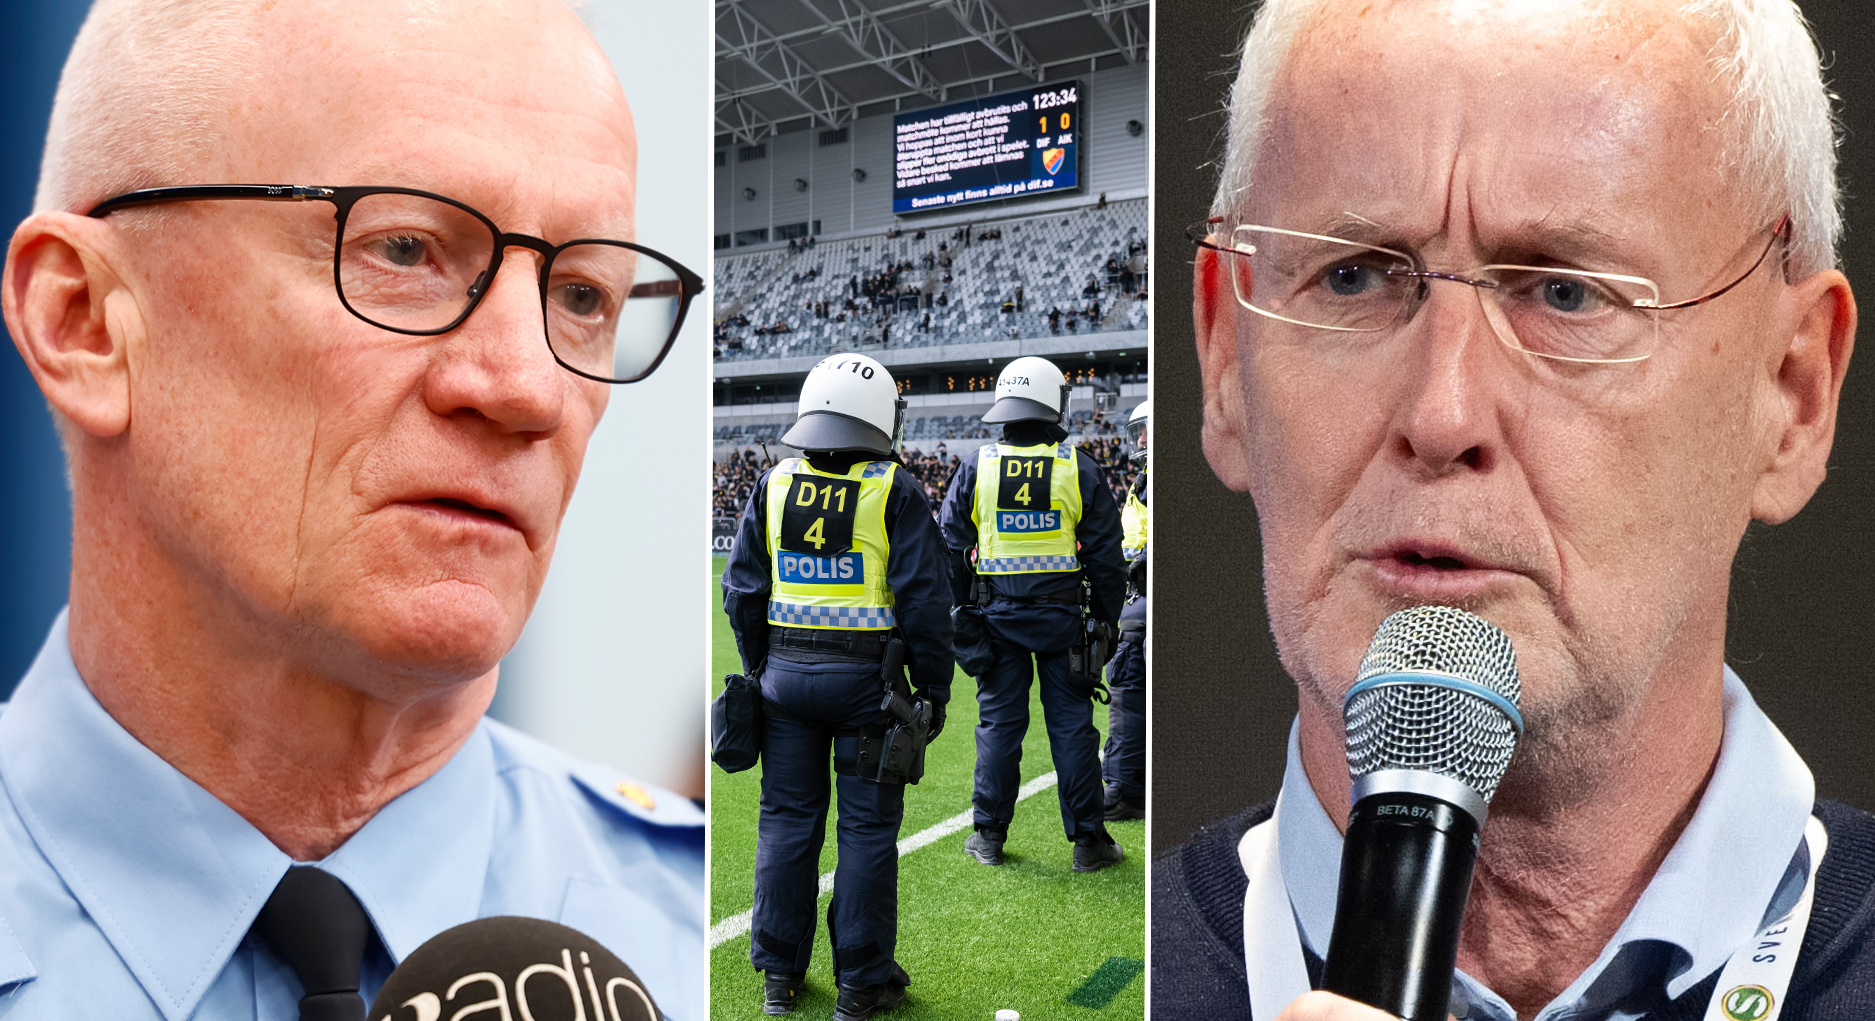 Swedish Elite Football Faces Controversy Over Proposal to Empty Stands for Security Measures